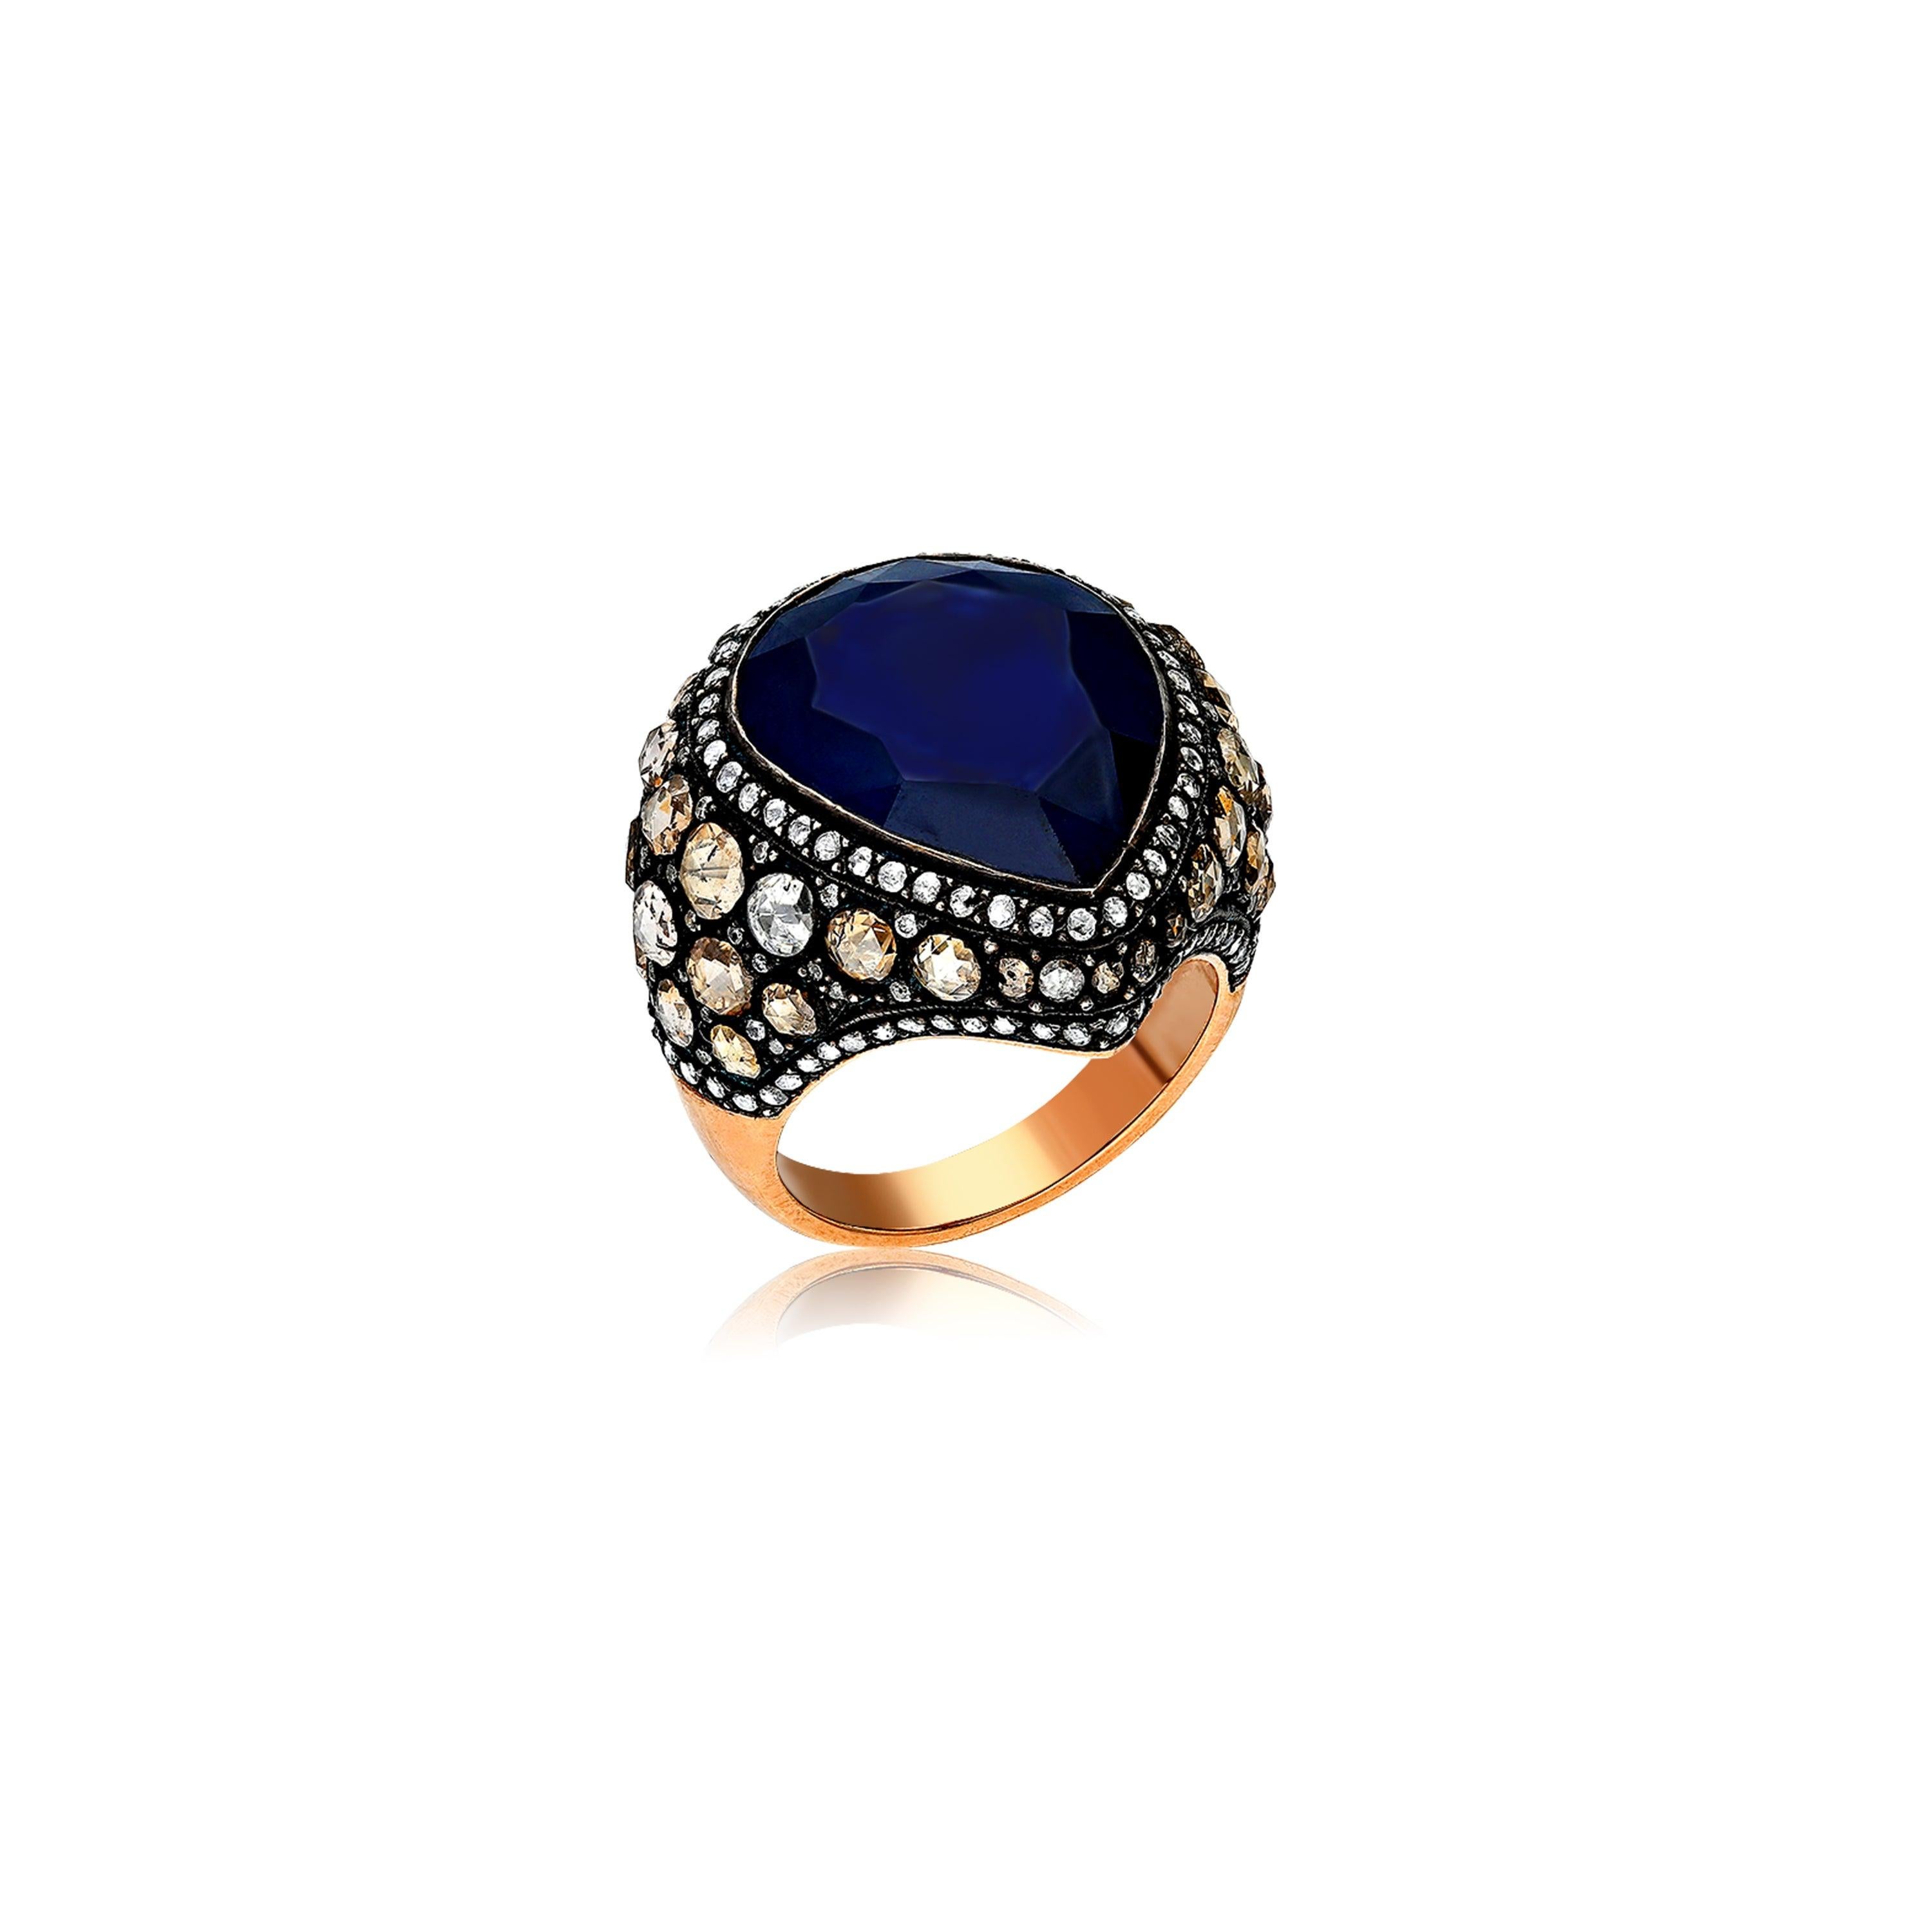 For Sale:  8K Gold and Silver Cocktail Ring with a Sapphire and White Rose Cut Diamonds 2